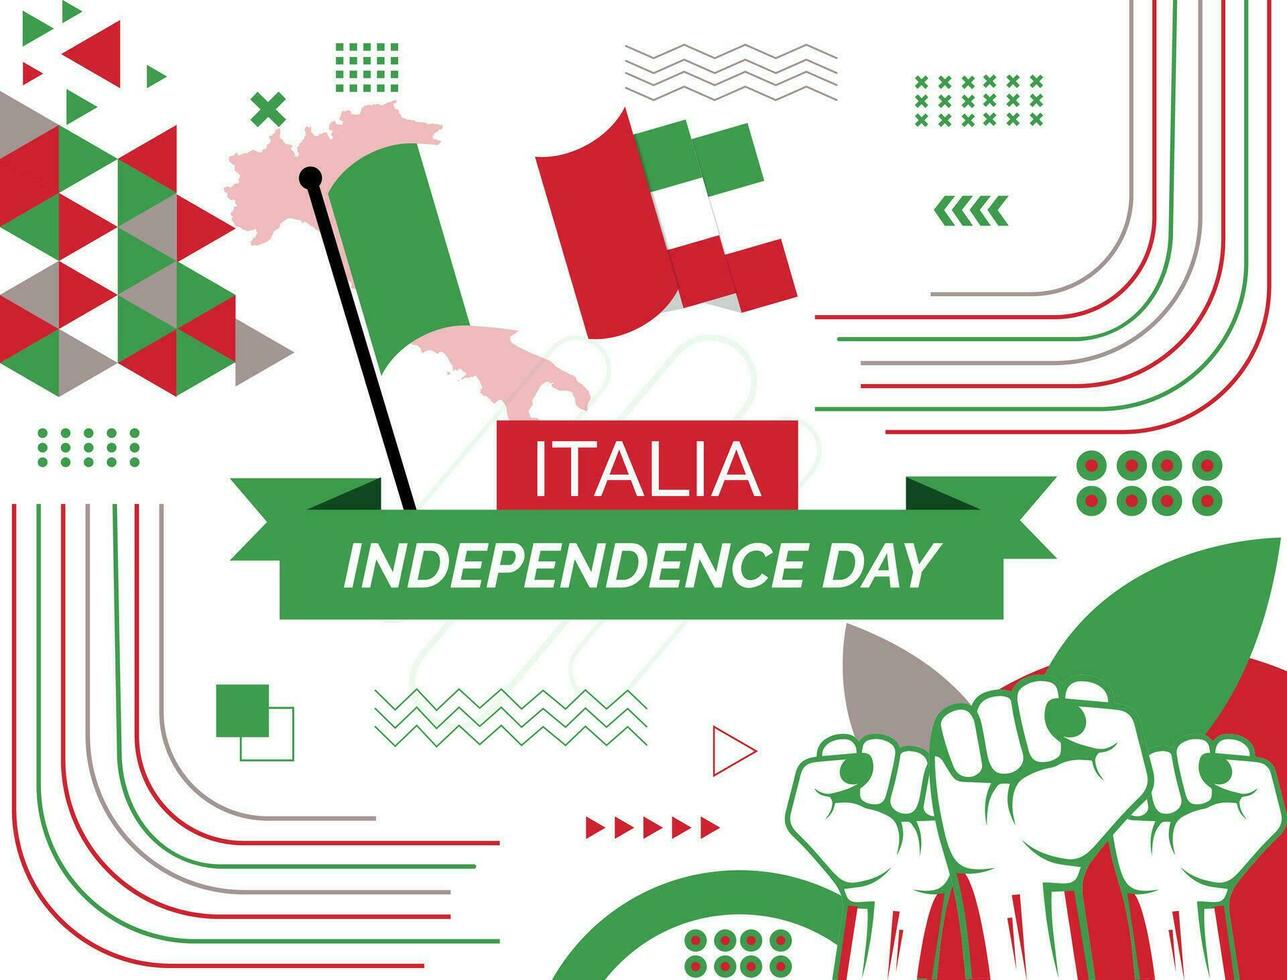 Italia national day banner with map, Flag of united arab emirates  colors theme background and geometric abstract retro modern colorfull design with raised hands or fists. vector